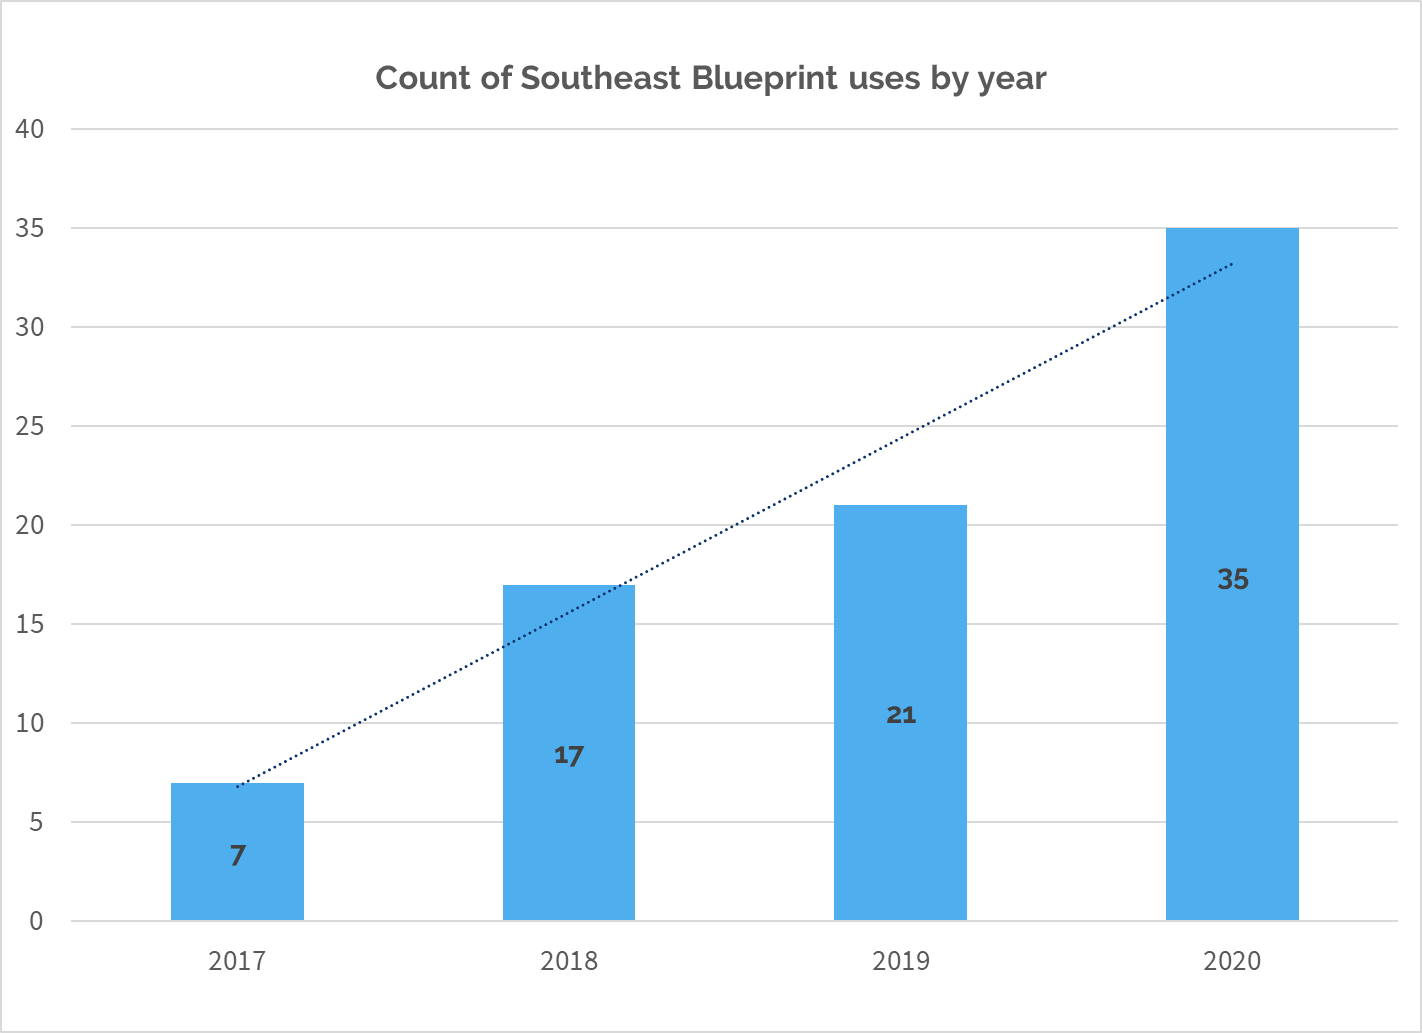 Bar graph showing number of Blueprint uses over time, increasing from 7 in 2017, 17 in 2018, 21 in 2019, and 35 in 2020.